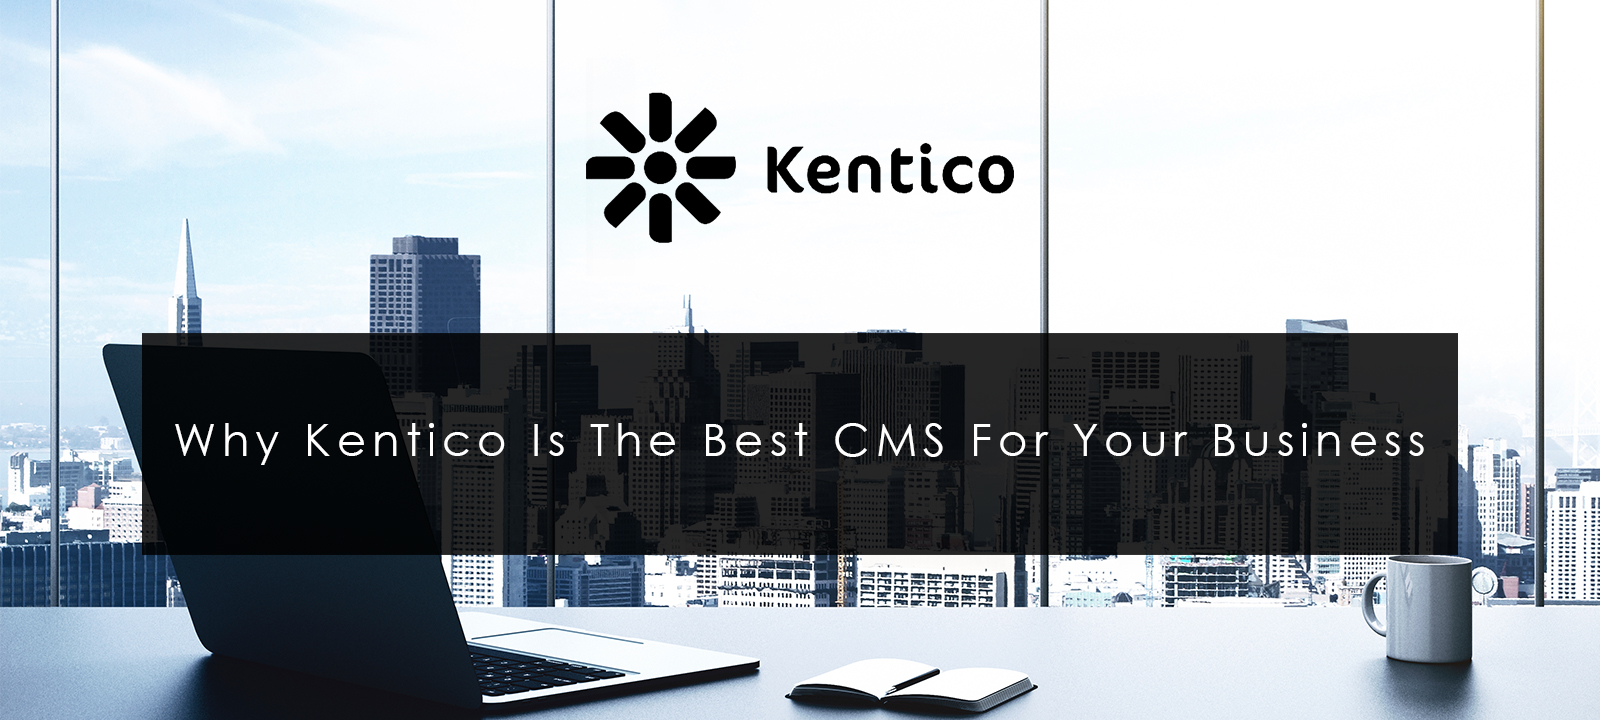 Why Kentico Is The Best CMS For Your Business